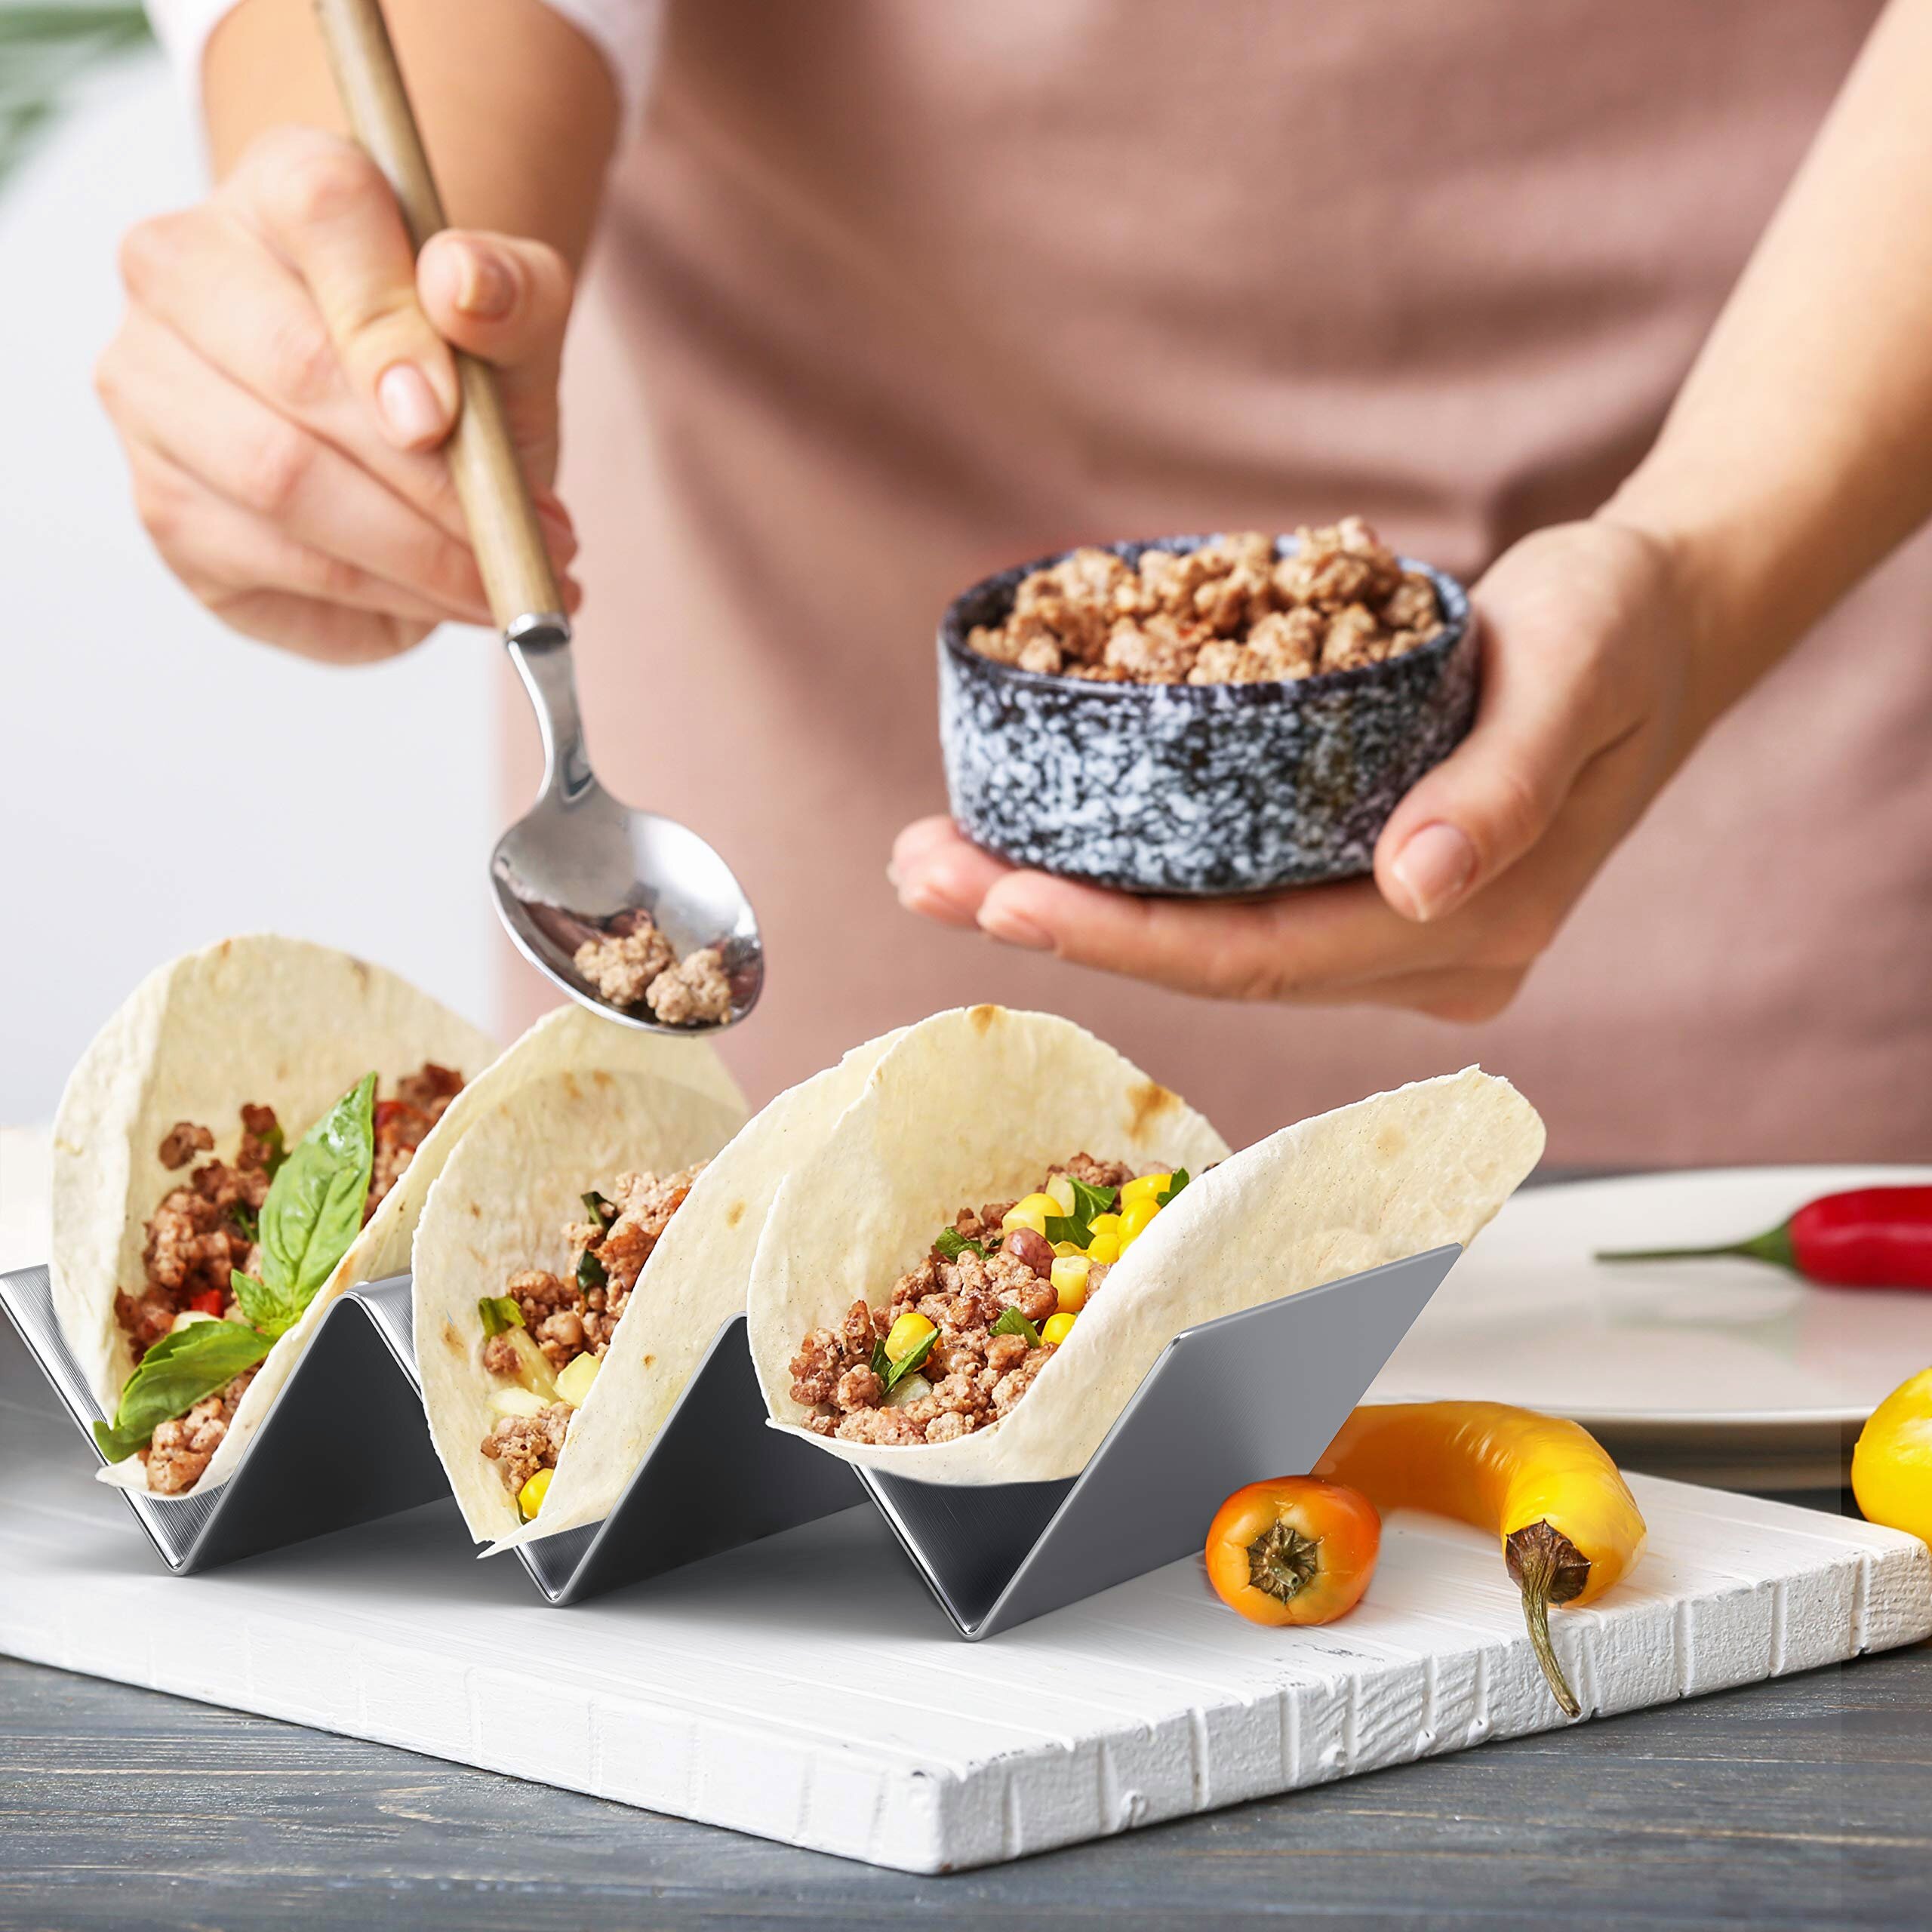 2 Pack Premium Taco Holder Stands,Stainless Steel Taco Holds Up To 4 or 5 Tacos Each as Rack,Oven Safe for Baking,Dishwasher and Grill Safe，Racks Hold Soft & Hard Shell Tacos，Easy To Fill Taco Rack 